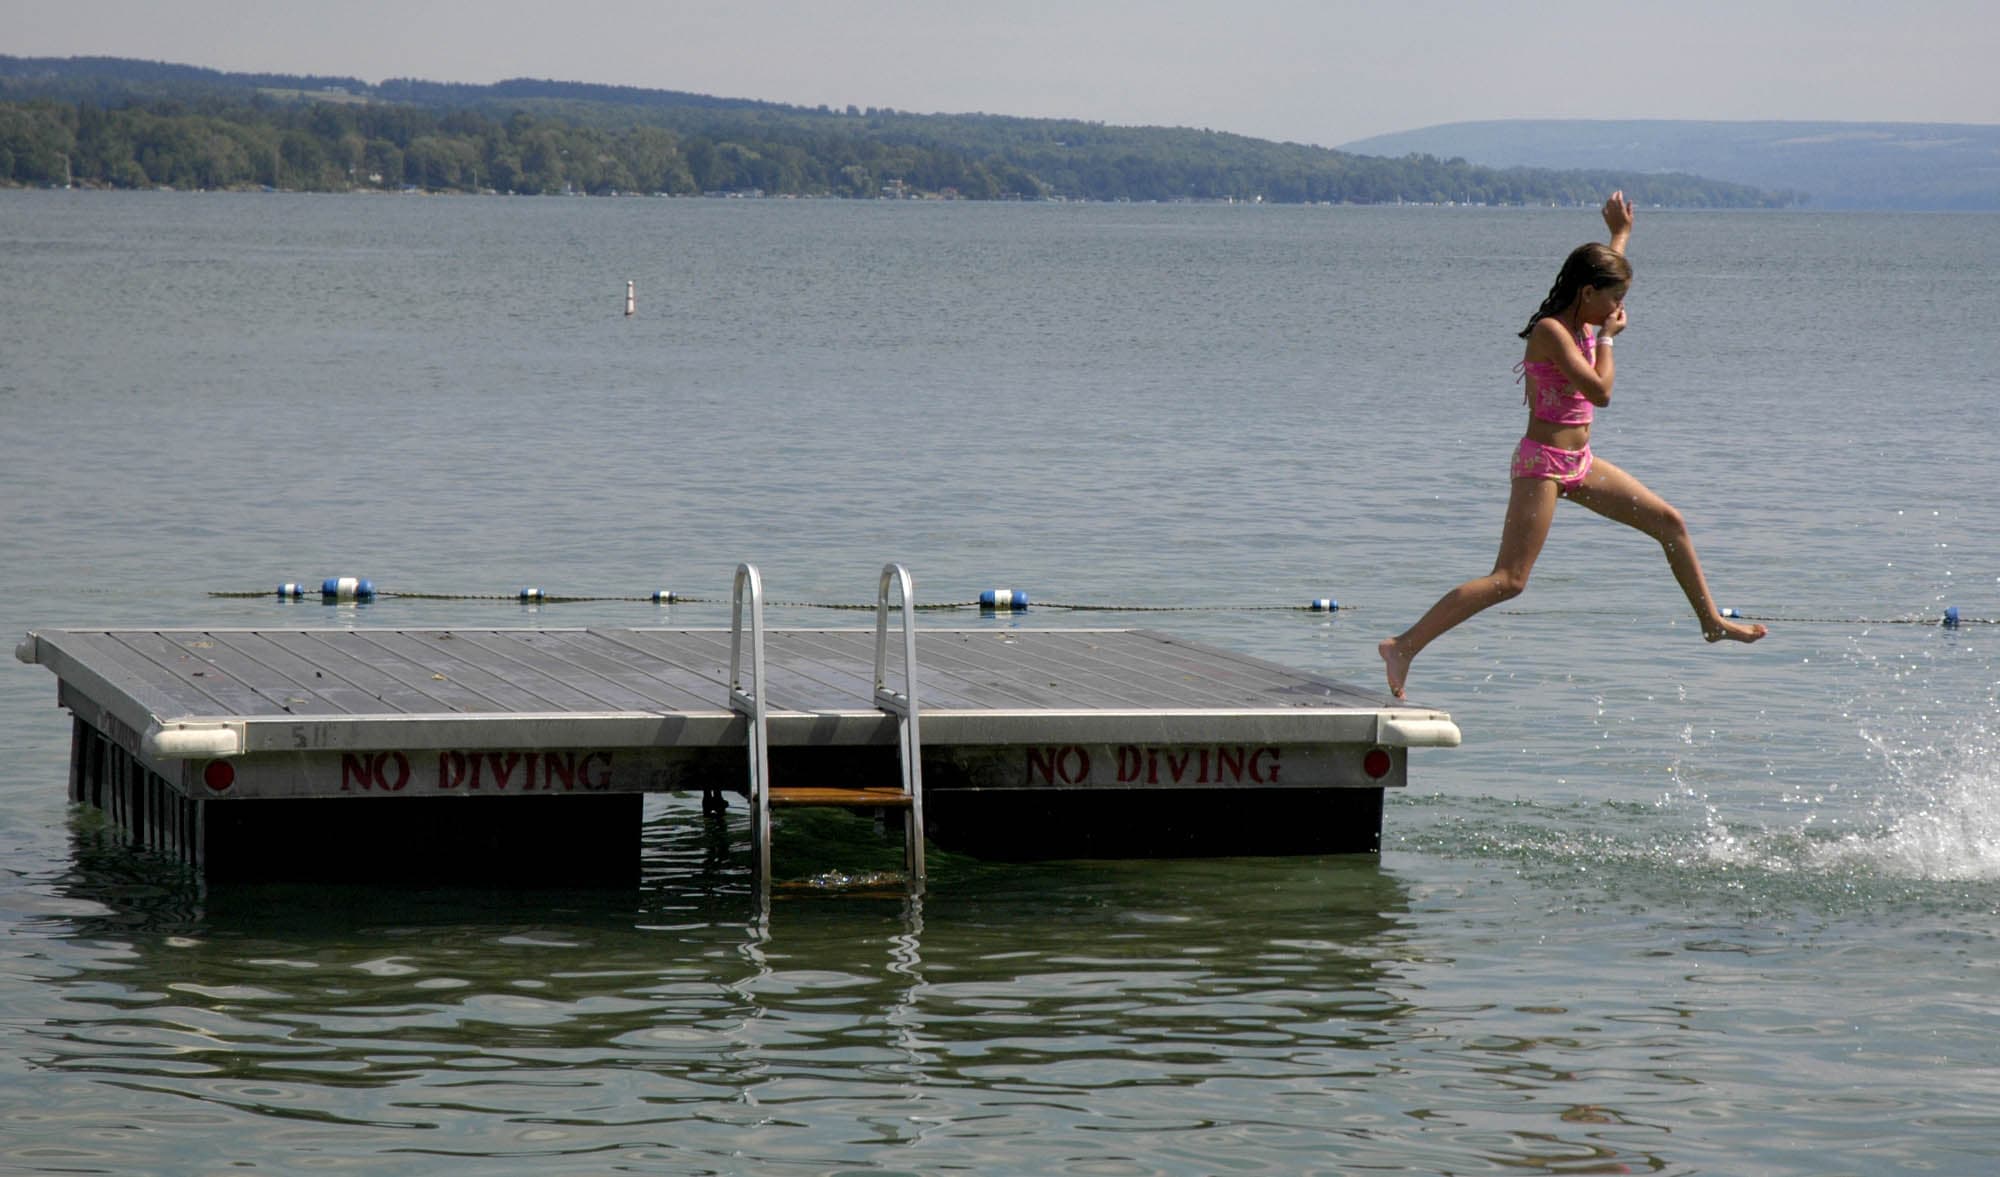 A young swimmer jumps into Skaneateles Lake in Skaneateles, N.Y. The small lakeside town in upstate New York's Finger Lakes is just one of many destinations you could consider visiting this summer. (Kevin Rivoli/AP)